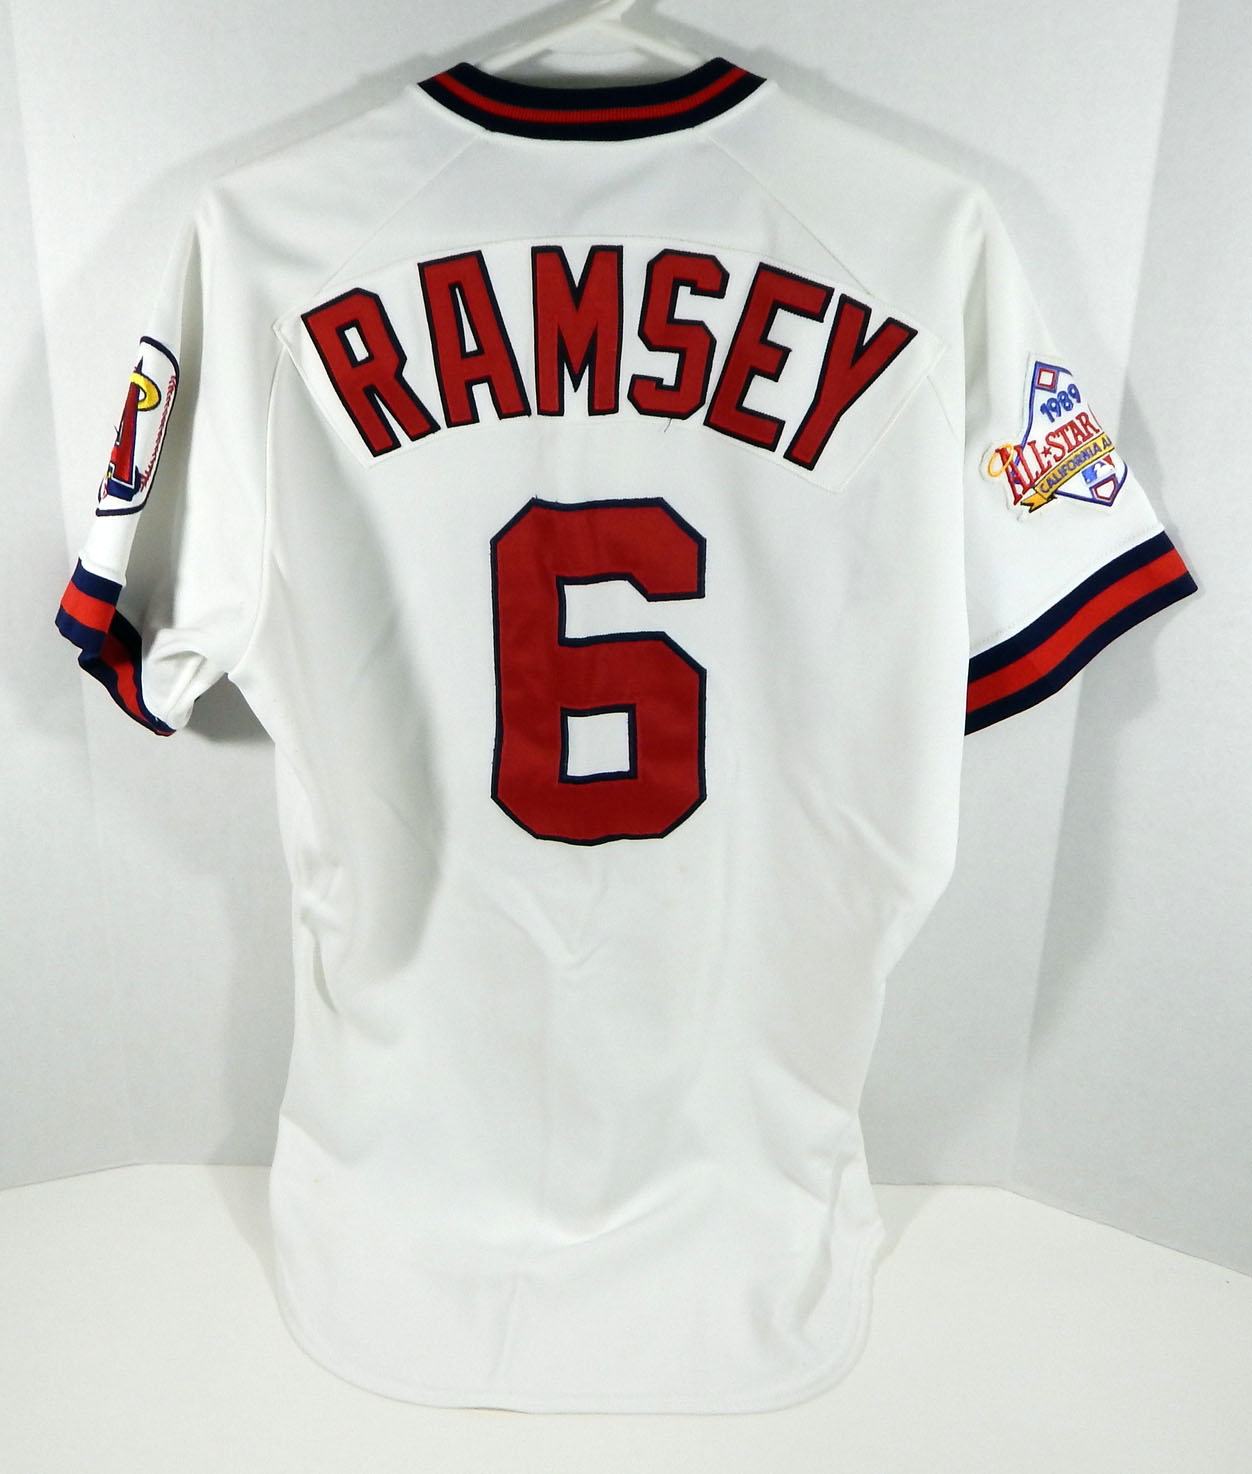 angels all star game jersey